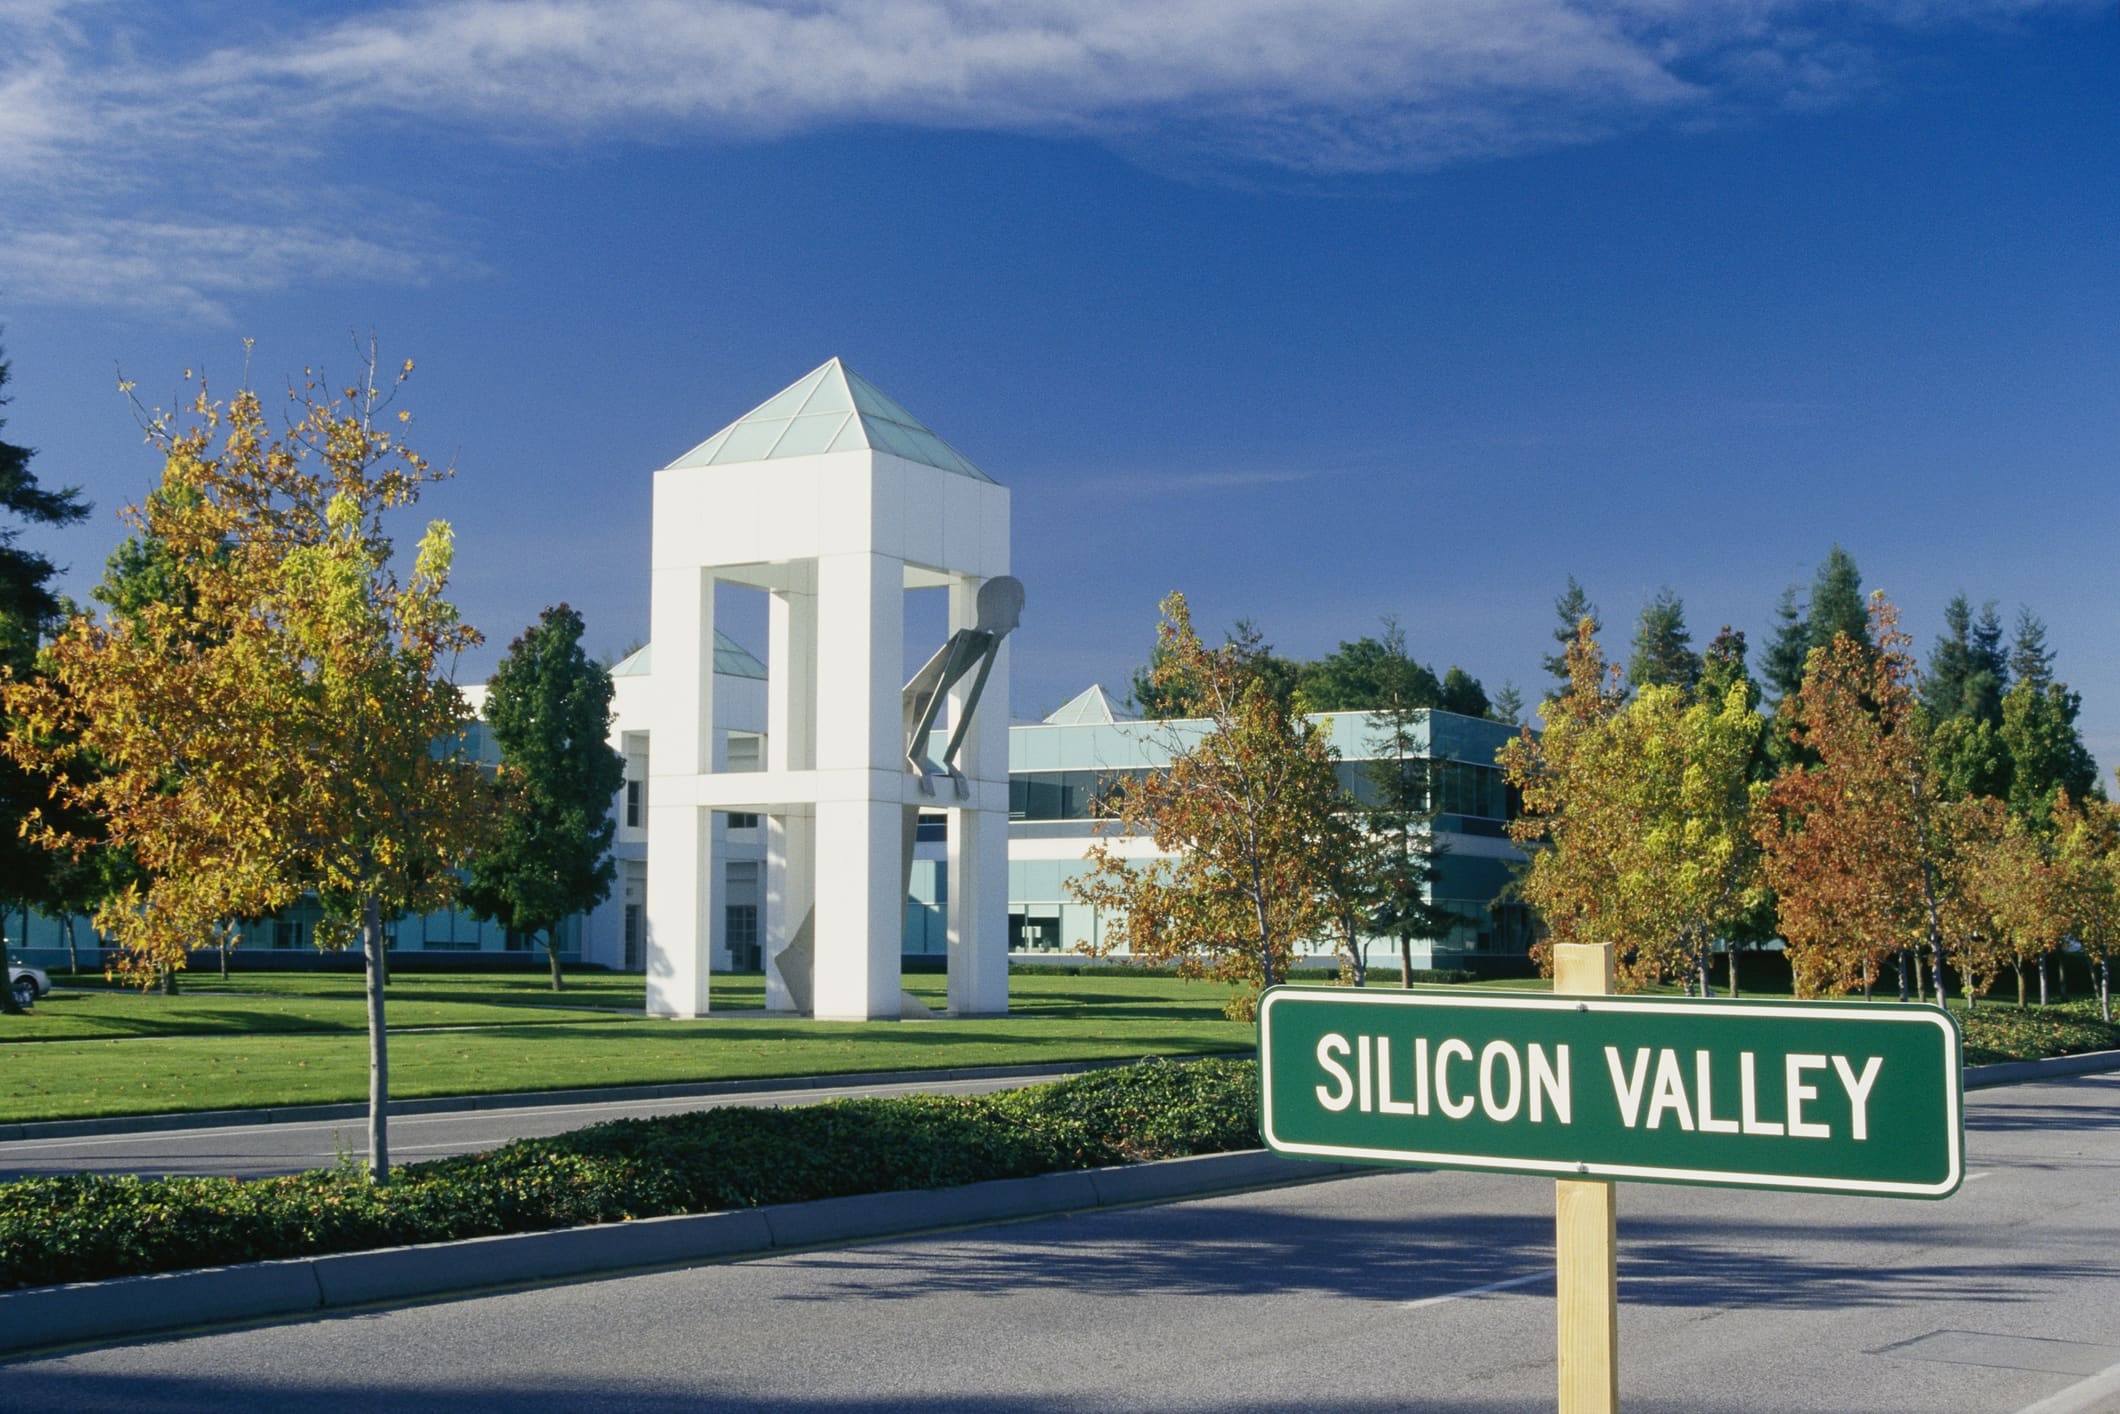 The Greeks of Silicon Valley are ready to support the Greek innovation ecosystem